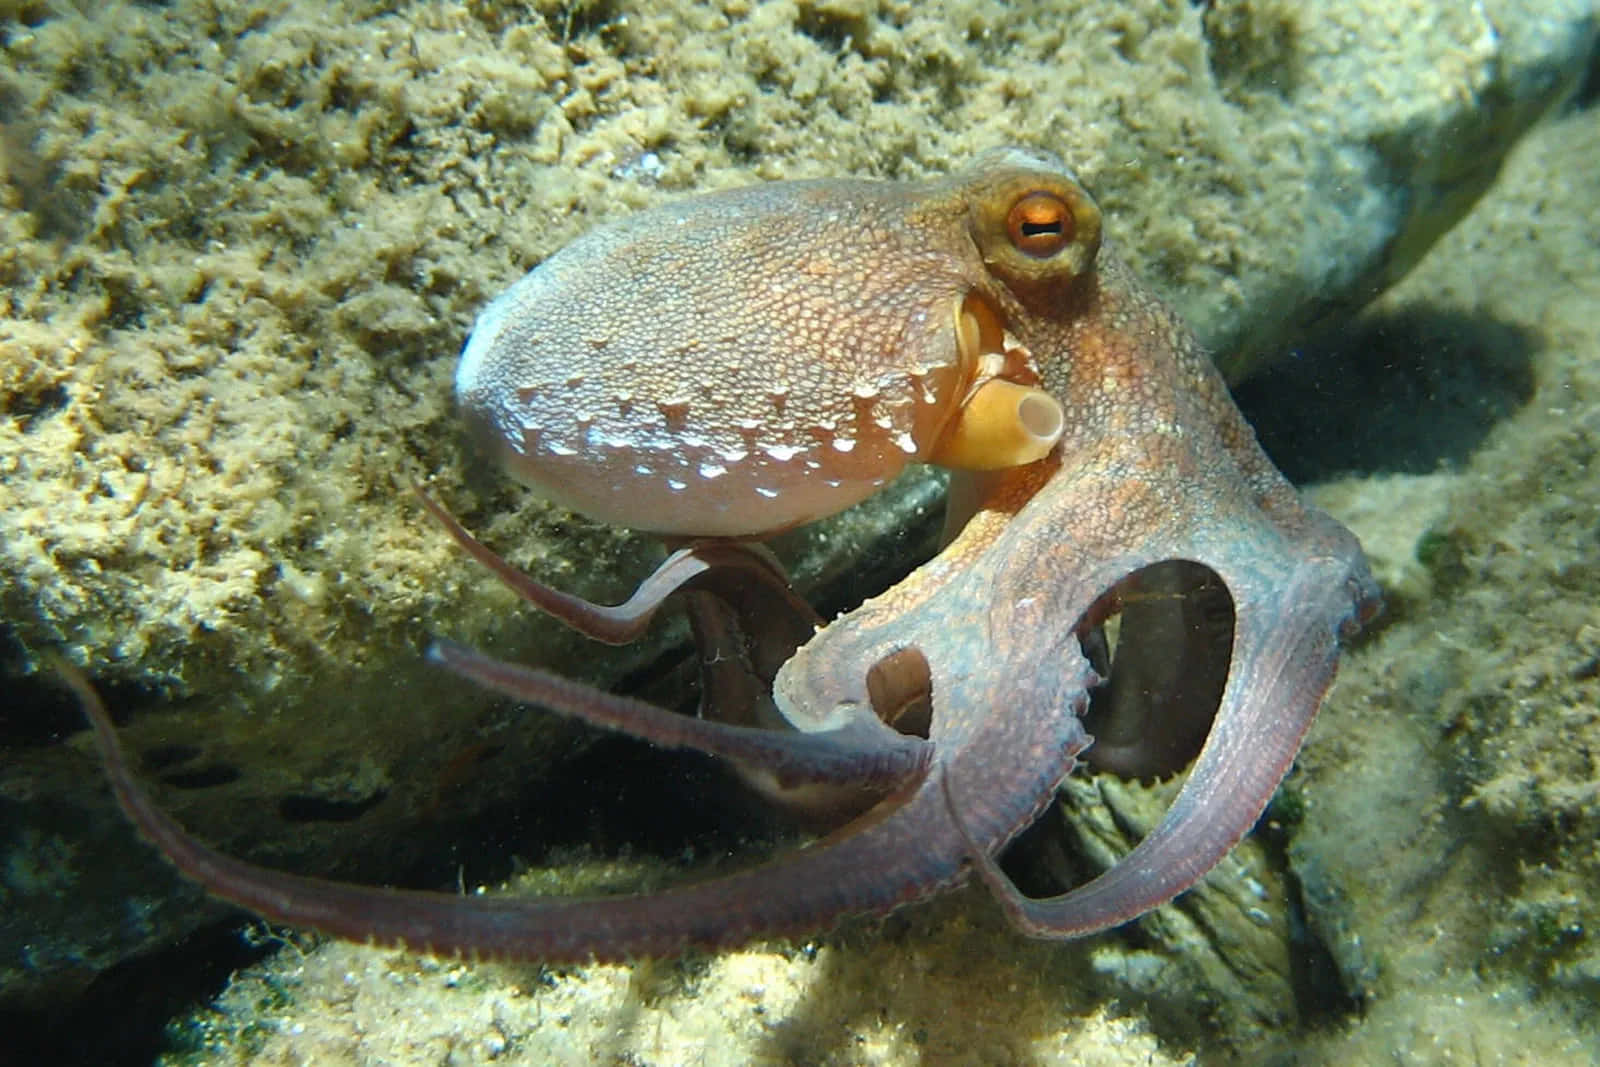 A vivid octopus swimming in the blue depths of the sea